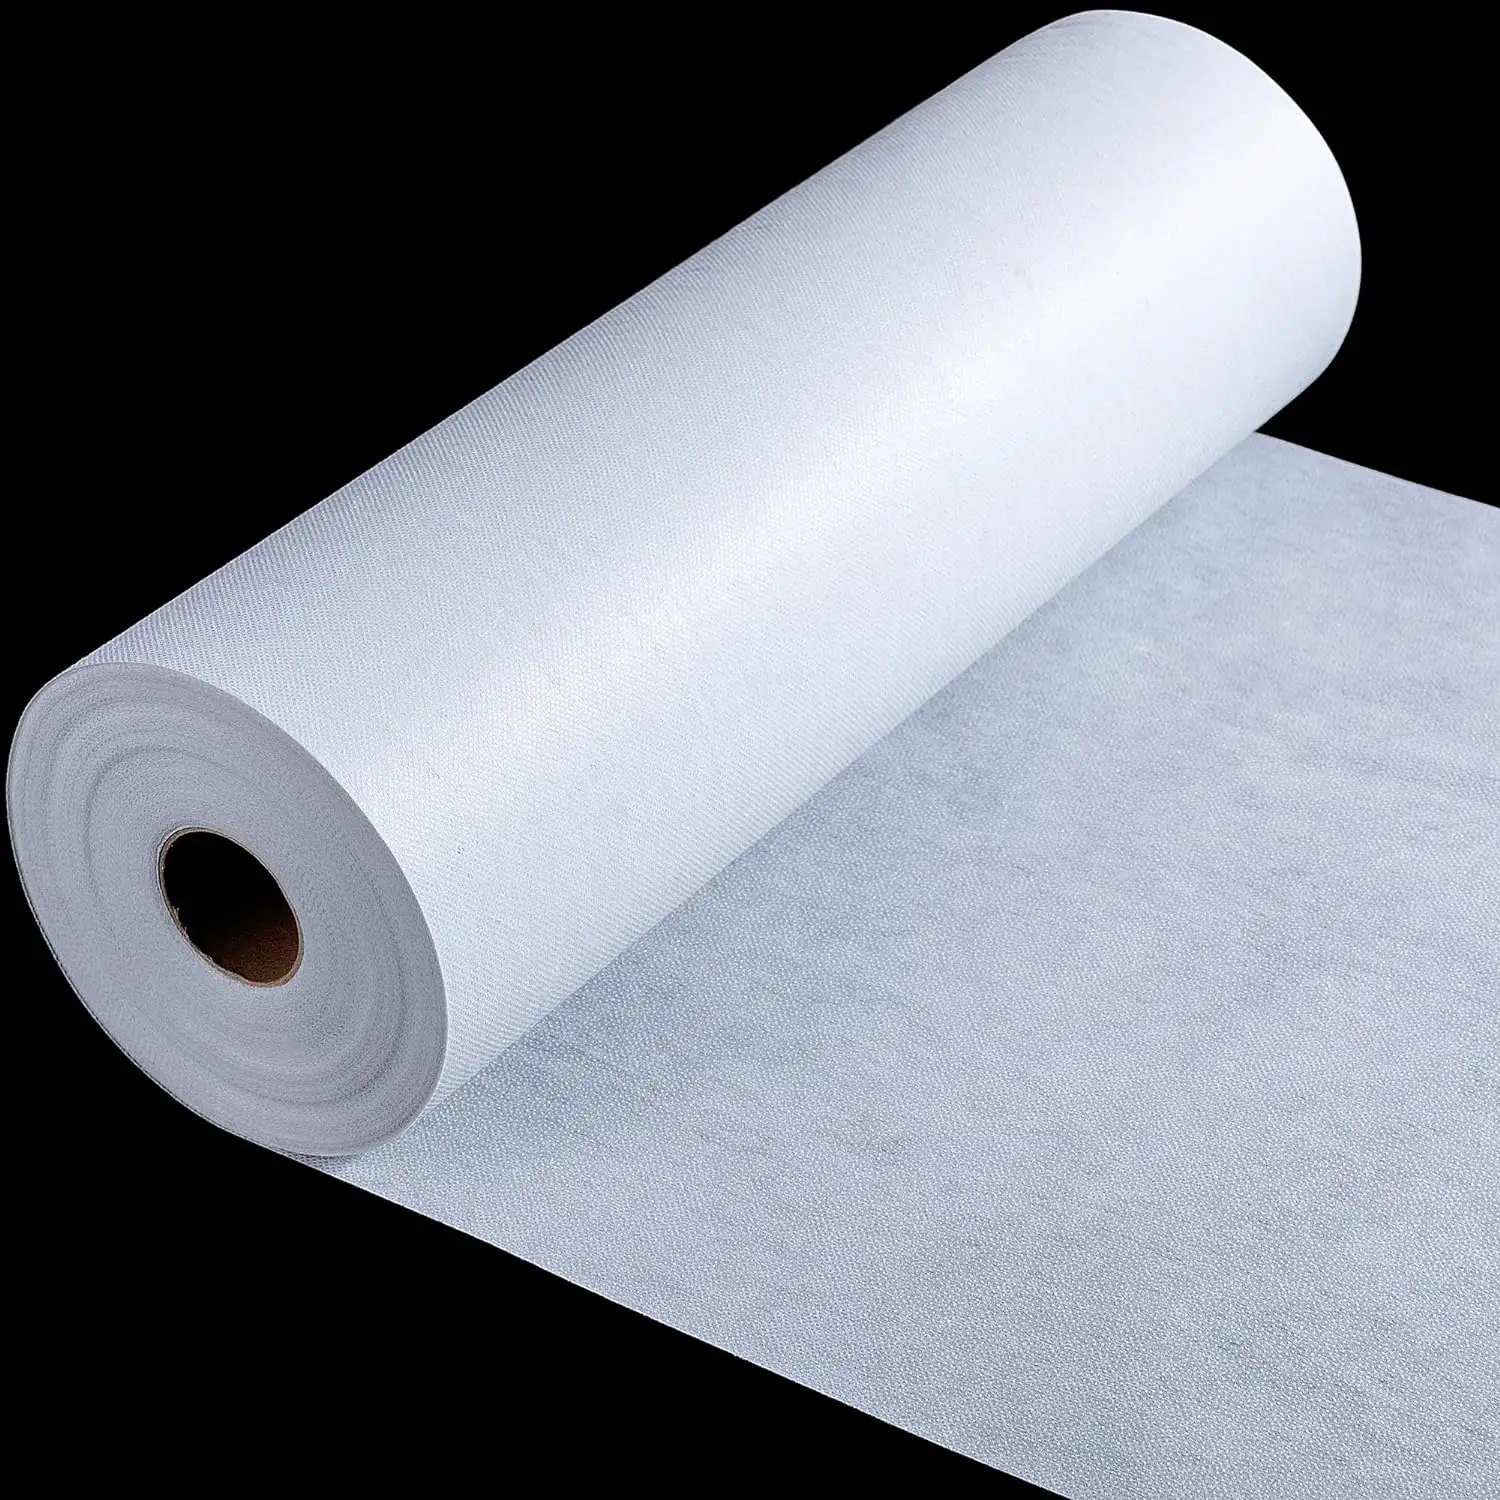 Medium weight fusible Iron On Non-woven Premium Interfacing interlining Fabric 11.6" x 27yd for Sewing craft